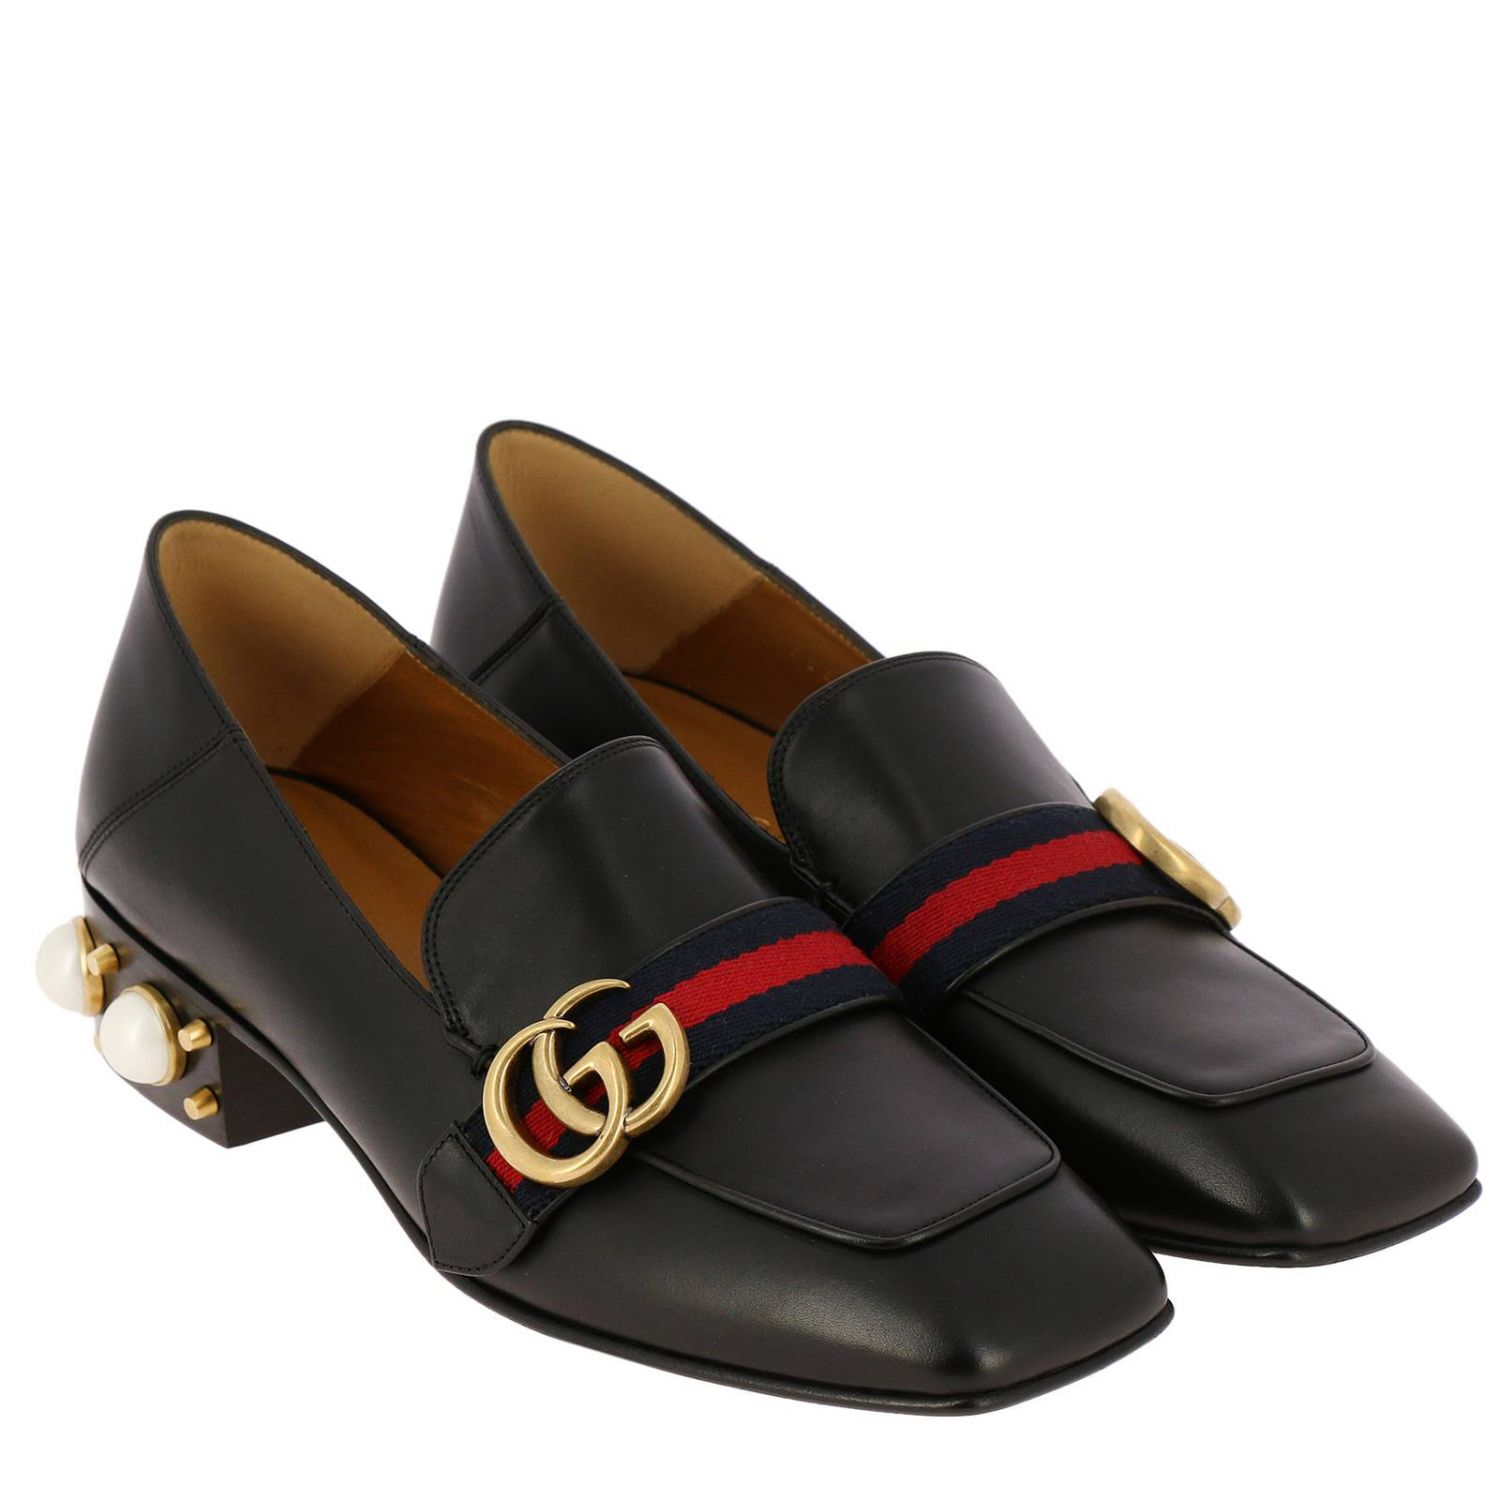 GUCCI: Shoes women | Loafers Gucci Women Black | Loafers Gucci 423559 ...